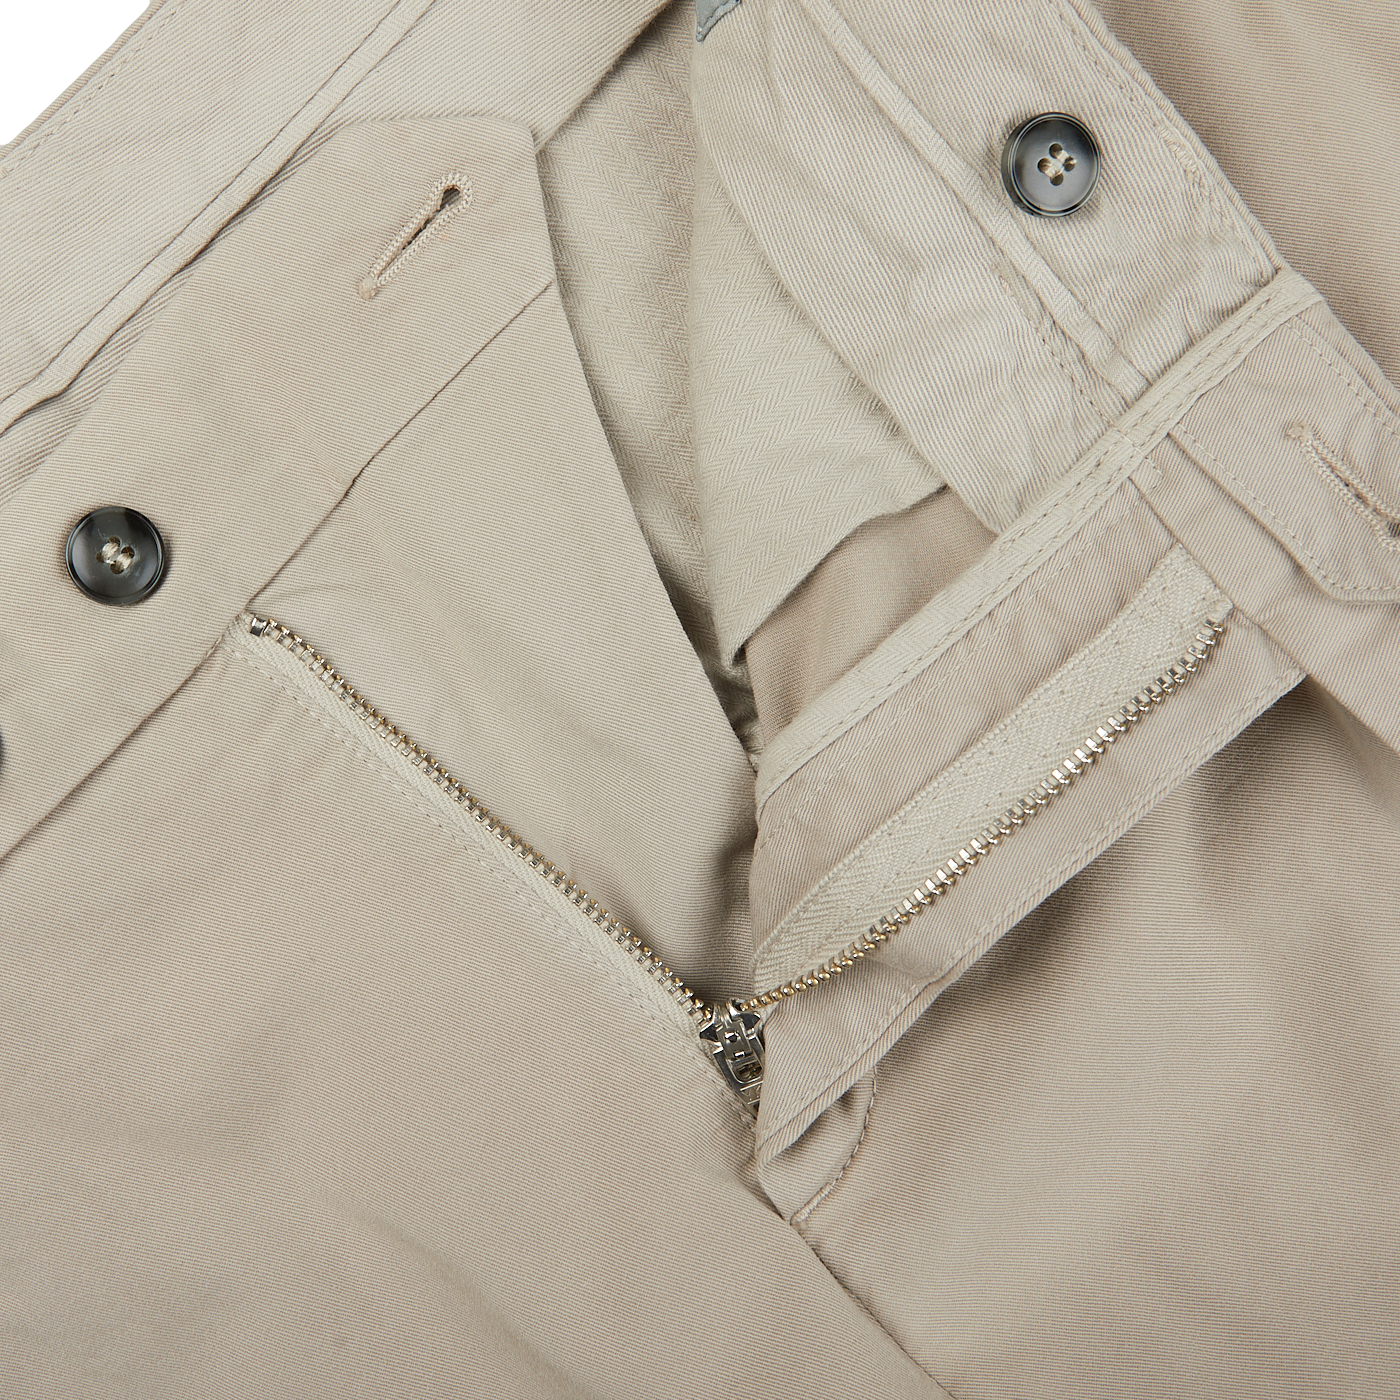 A close up of a pair of distressed Stone Beige Cotton Stretch Flat Front Chinos with zippers by Canali.